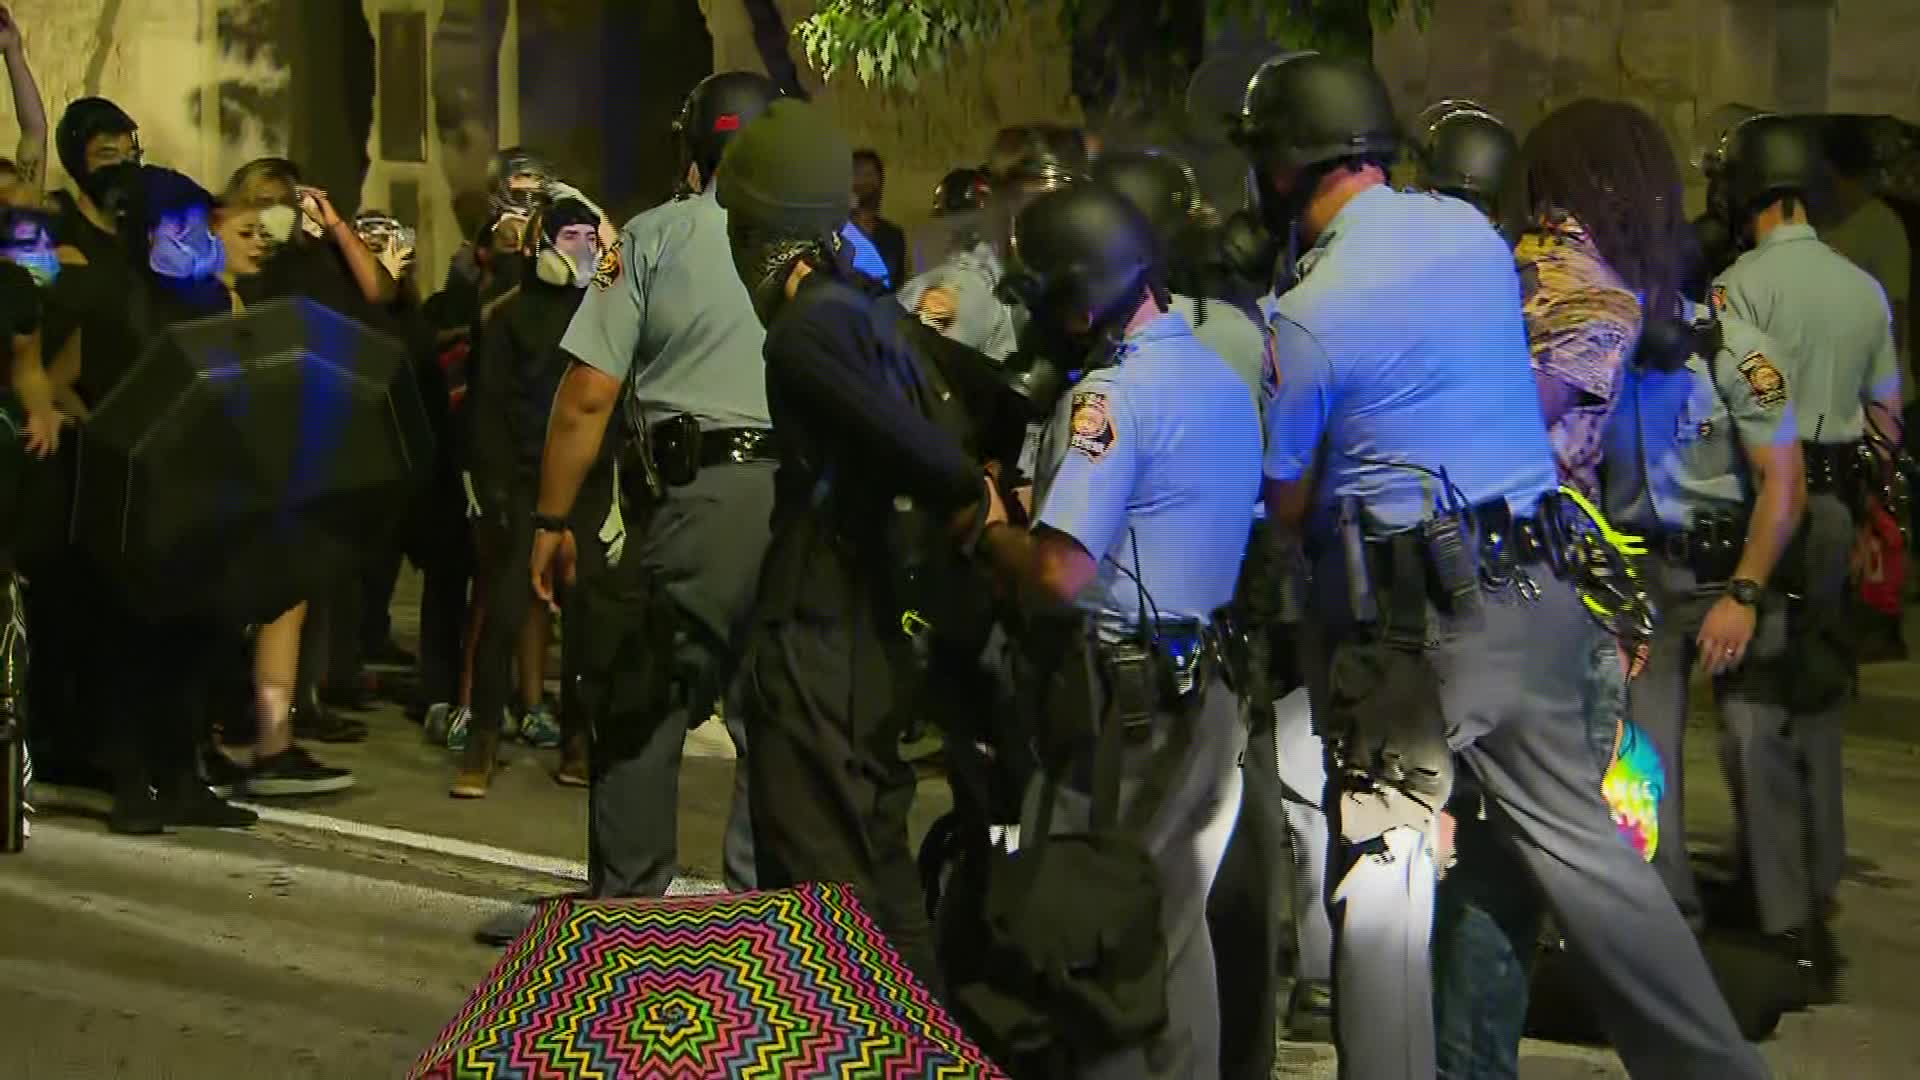 Atlanta police confirm "a number of arrests" at the protests